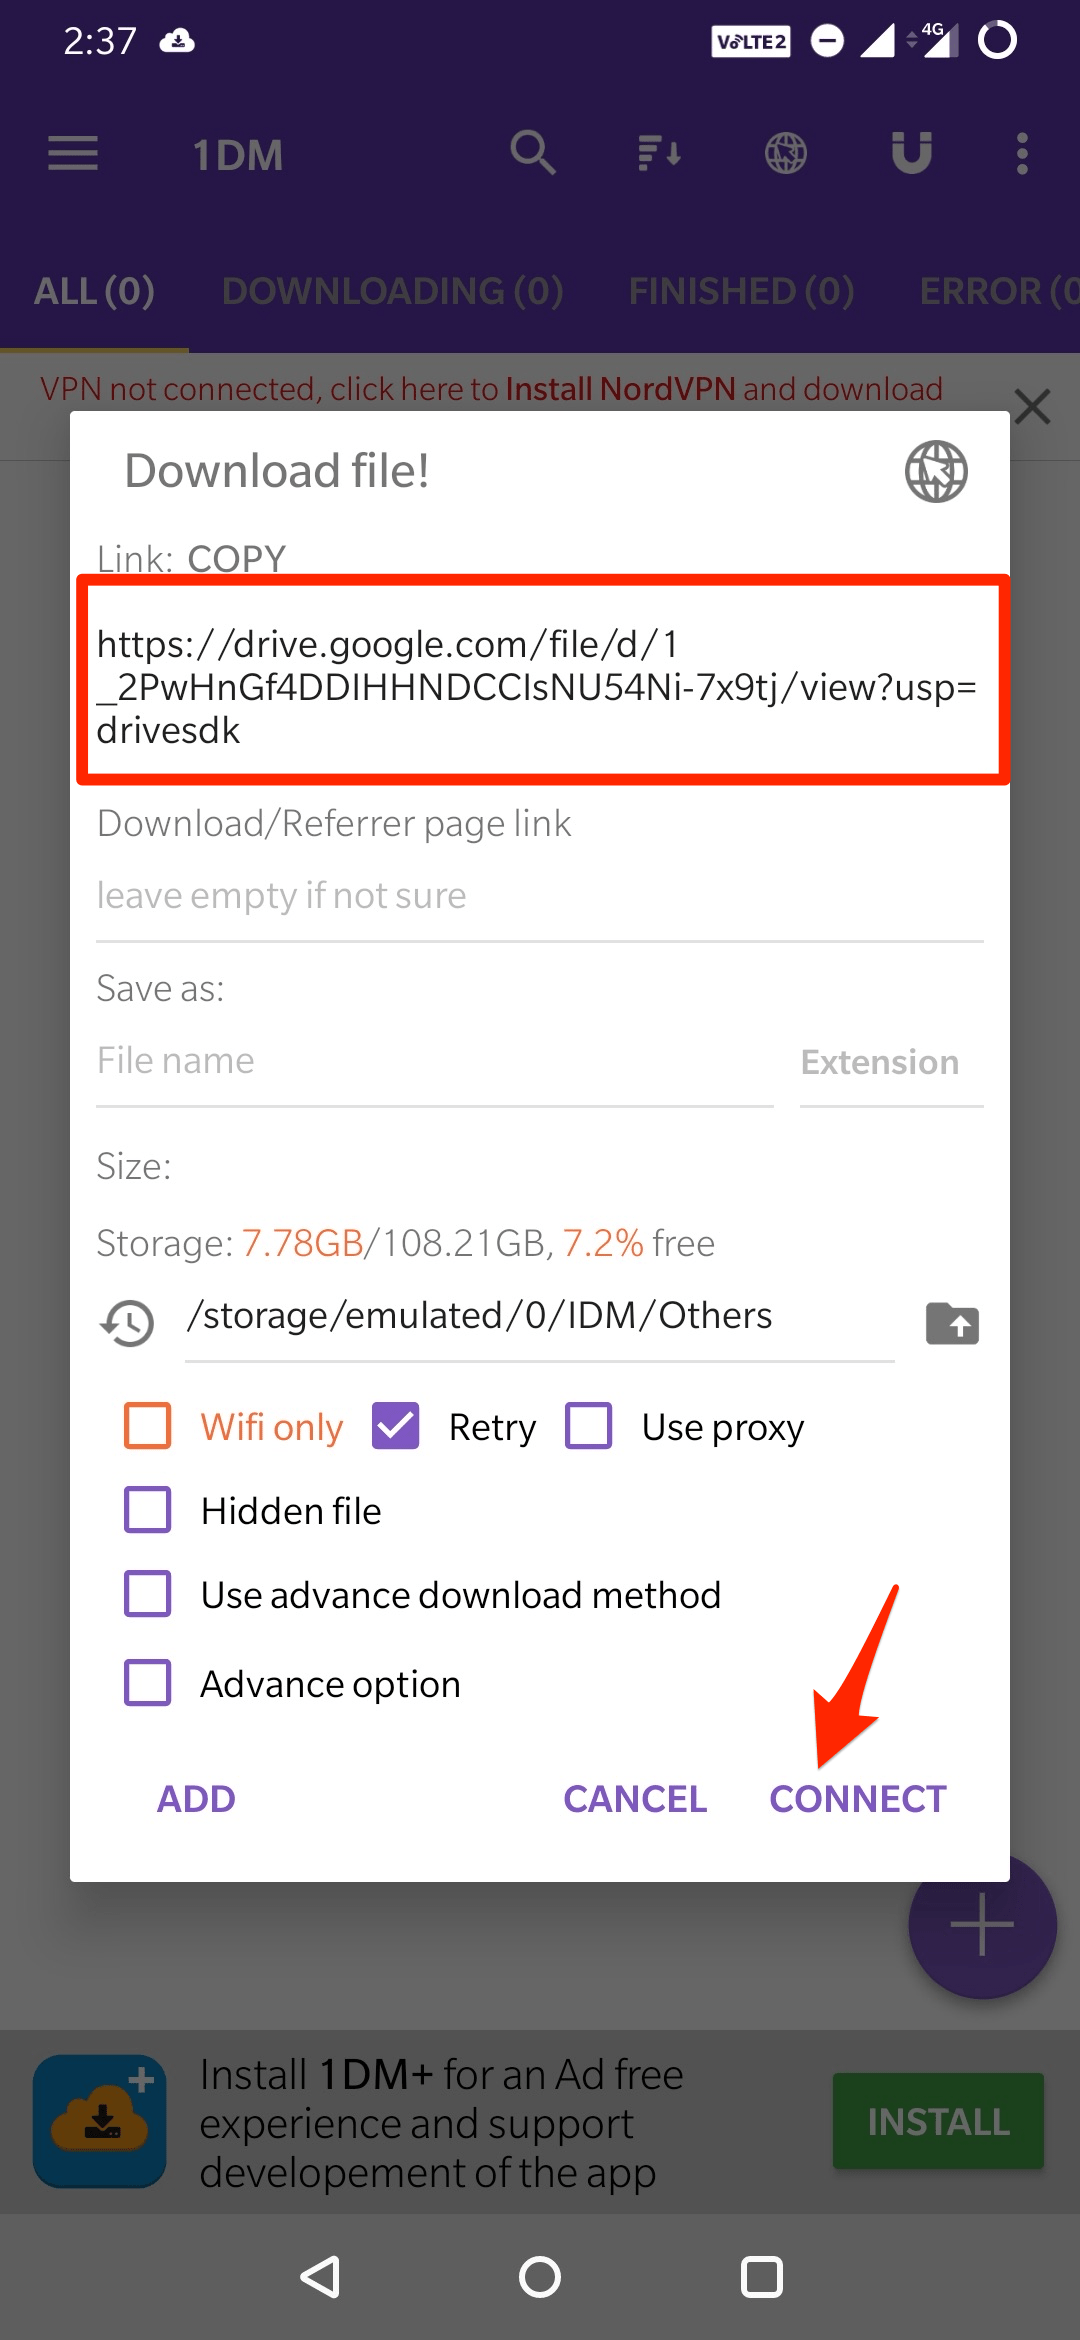 Paste the Sharing URL and Click Connect